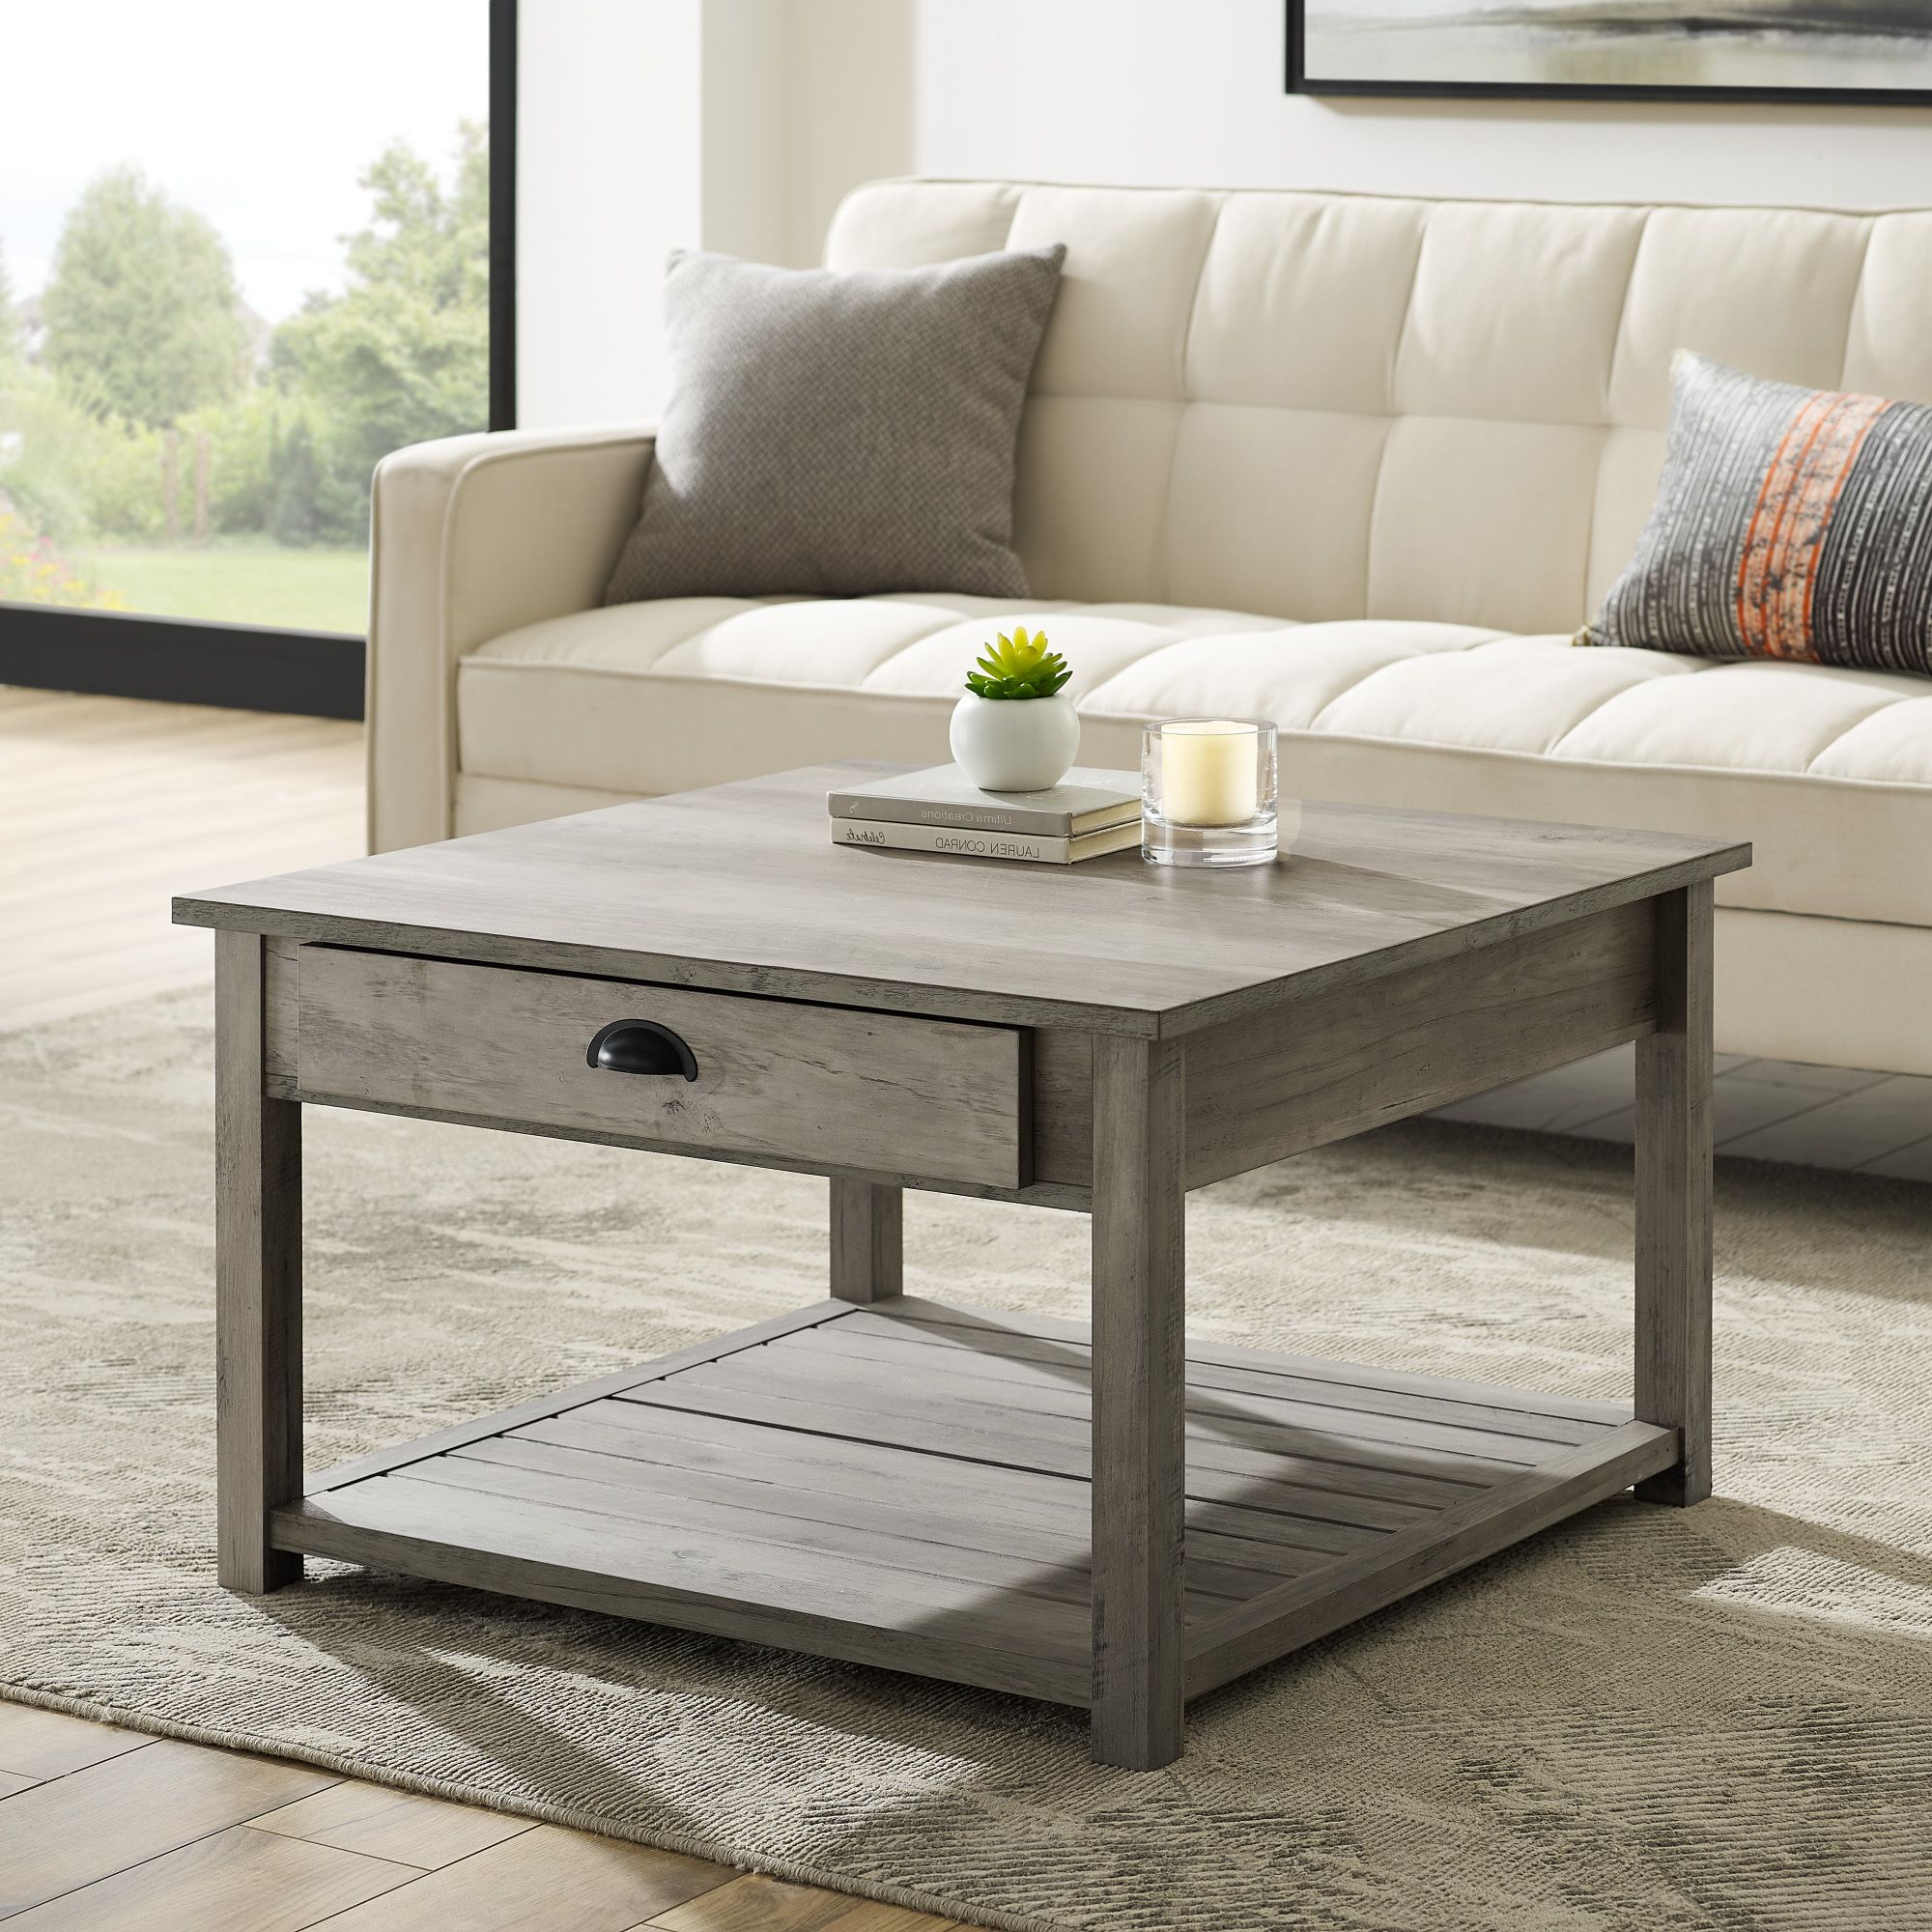 Preferred Gray Driftwood And Metal Coffee Tables With Regard To Manor Park 30 Inch Square Country Coffee Table, Grey Wash – Walmart (View 6 of 10)